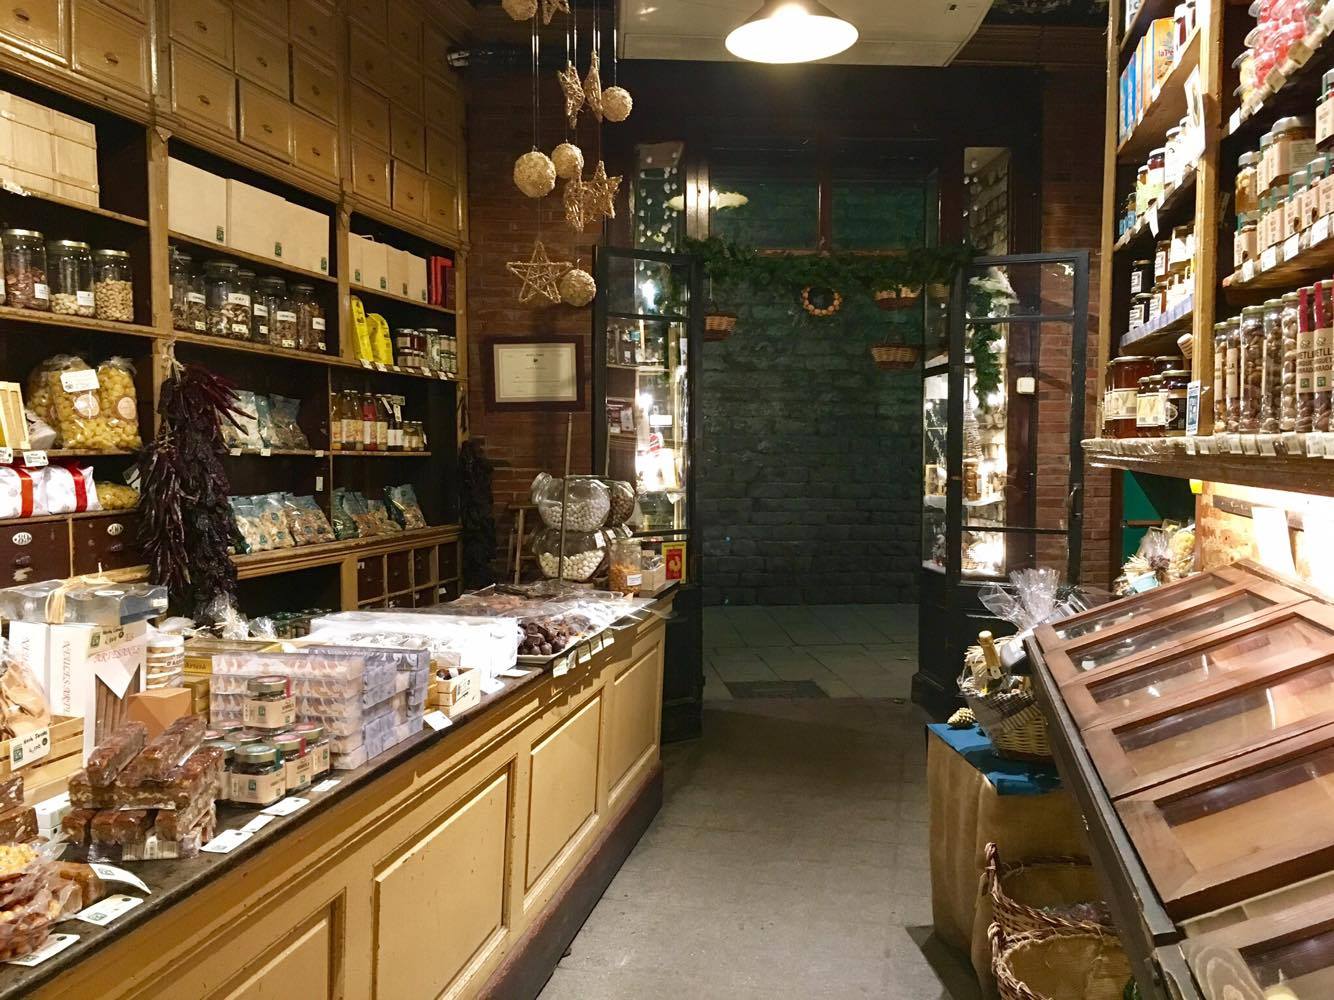  Inside the store 